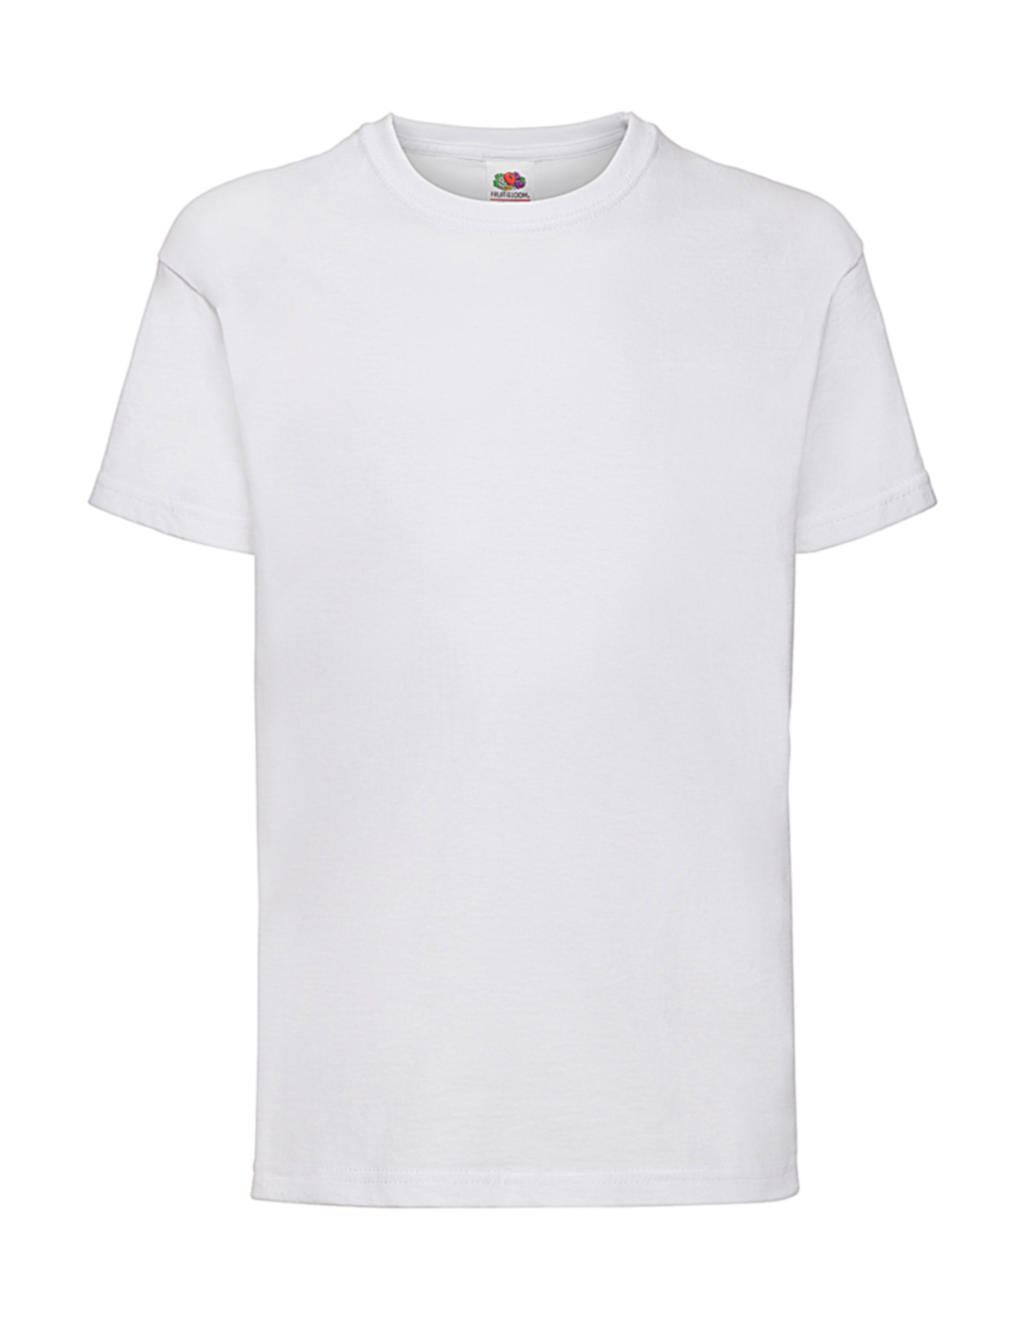  Kids Valueweight T in Farbe White